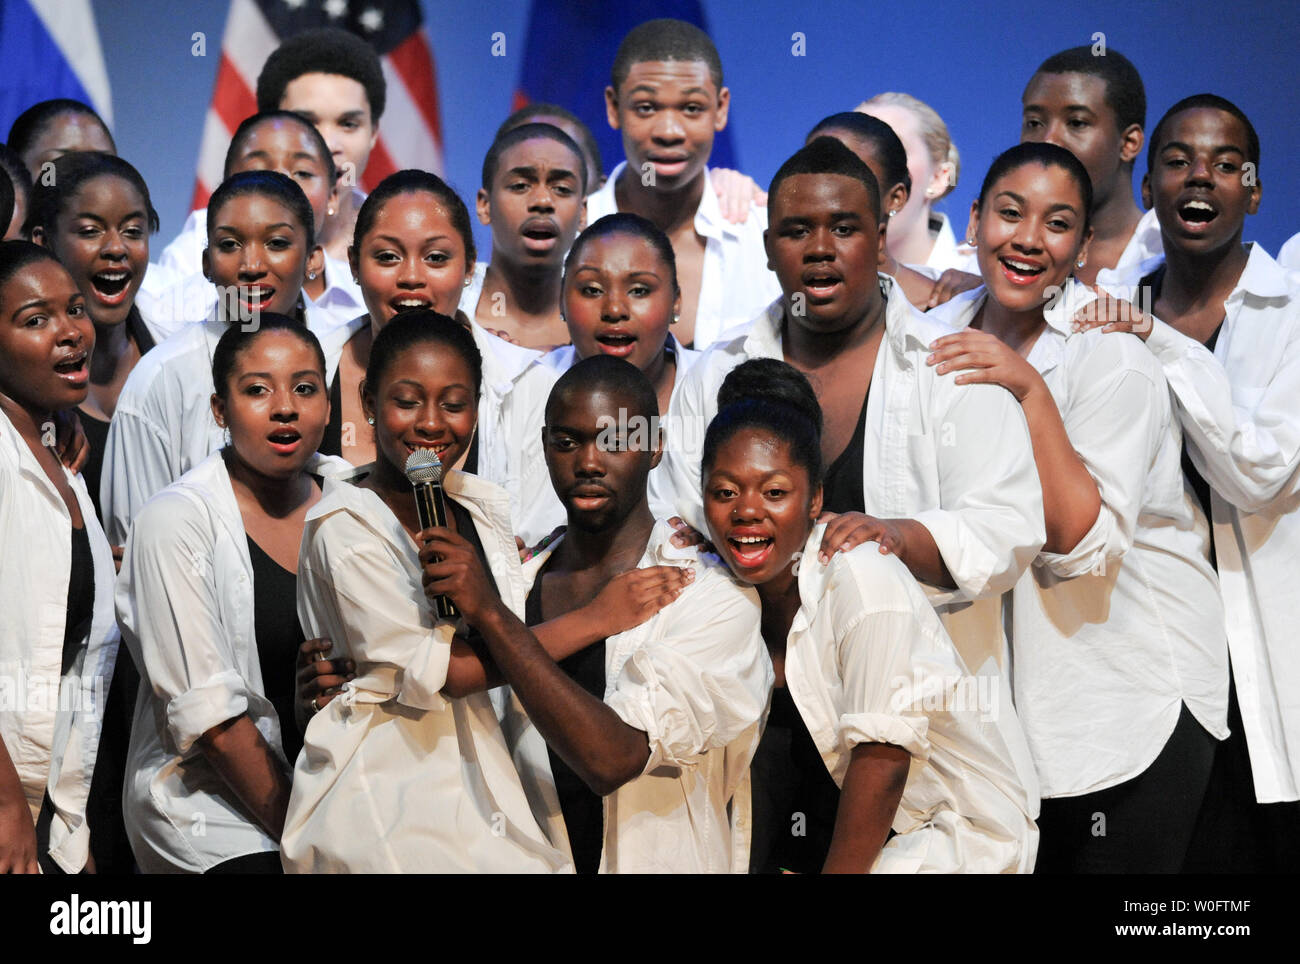 Students of the Duke Ellington School of the Arts perform for First Lady Michelle Obama, First Lady of Russia Svetlana Medvedeva, and other guests in Washington on June 24, 2010. UPI/Alexis C. Glenn Stock Photo